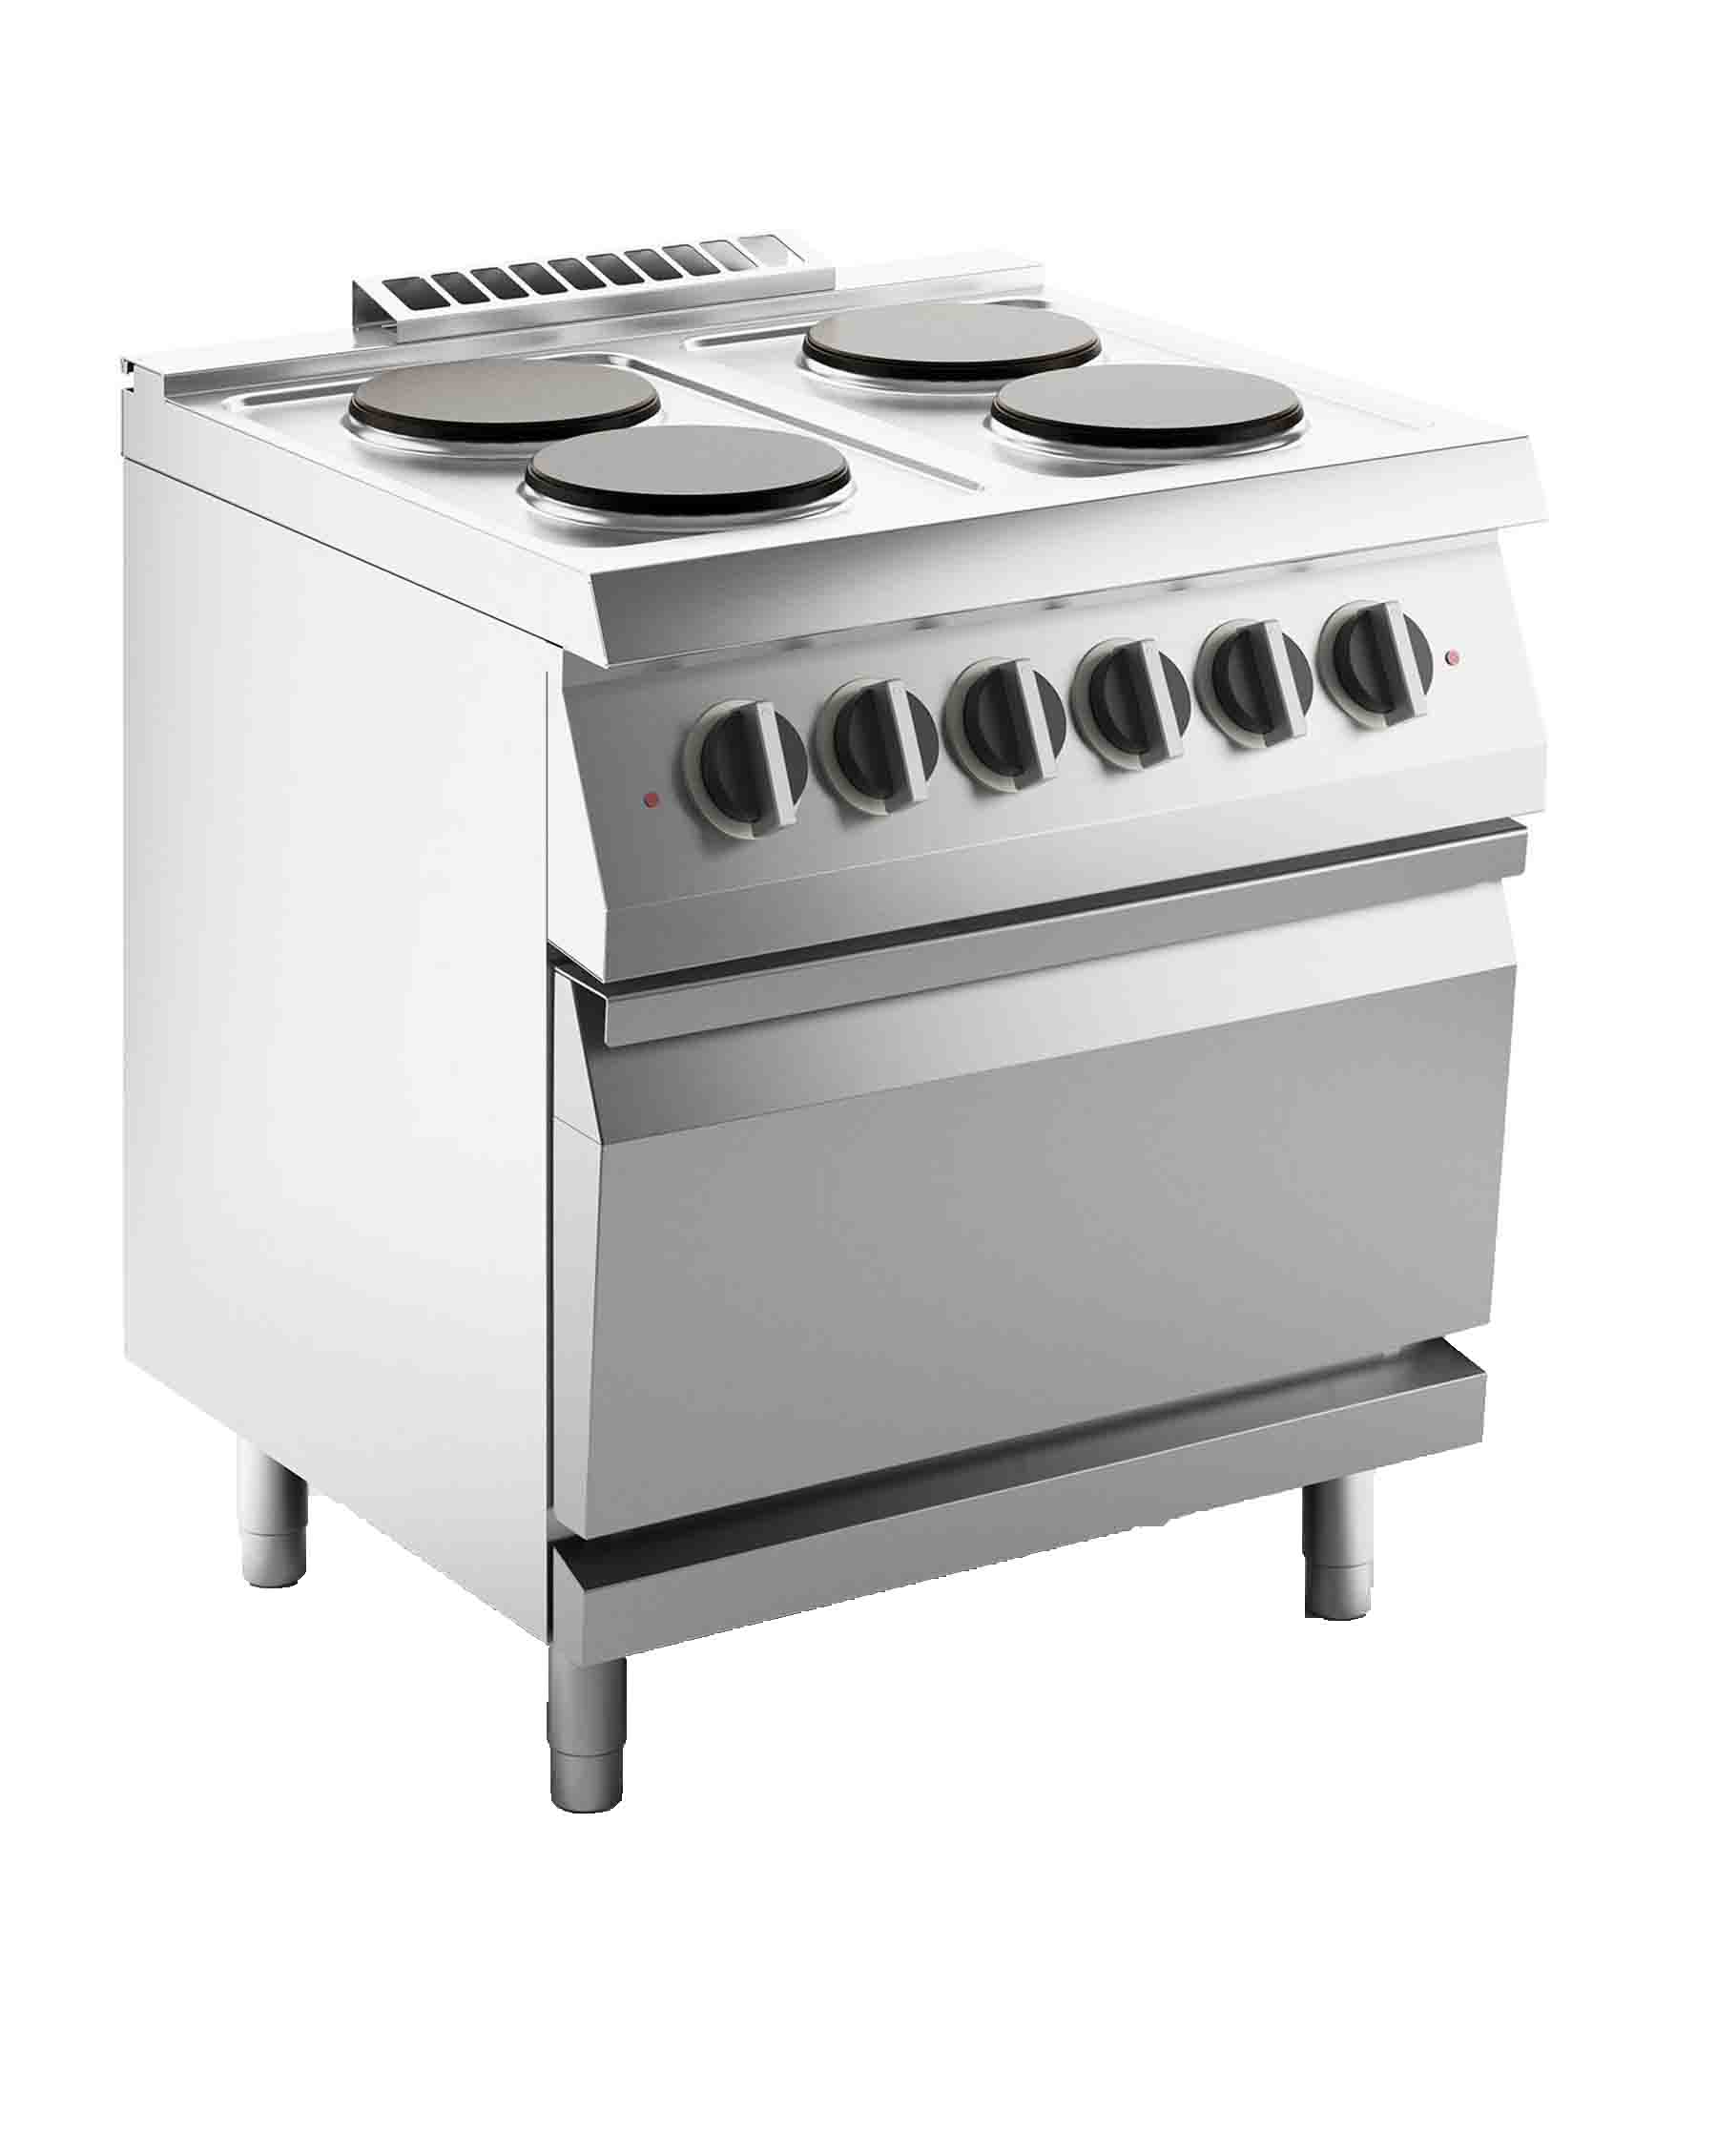 4 plates cooker and electric range